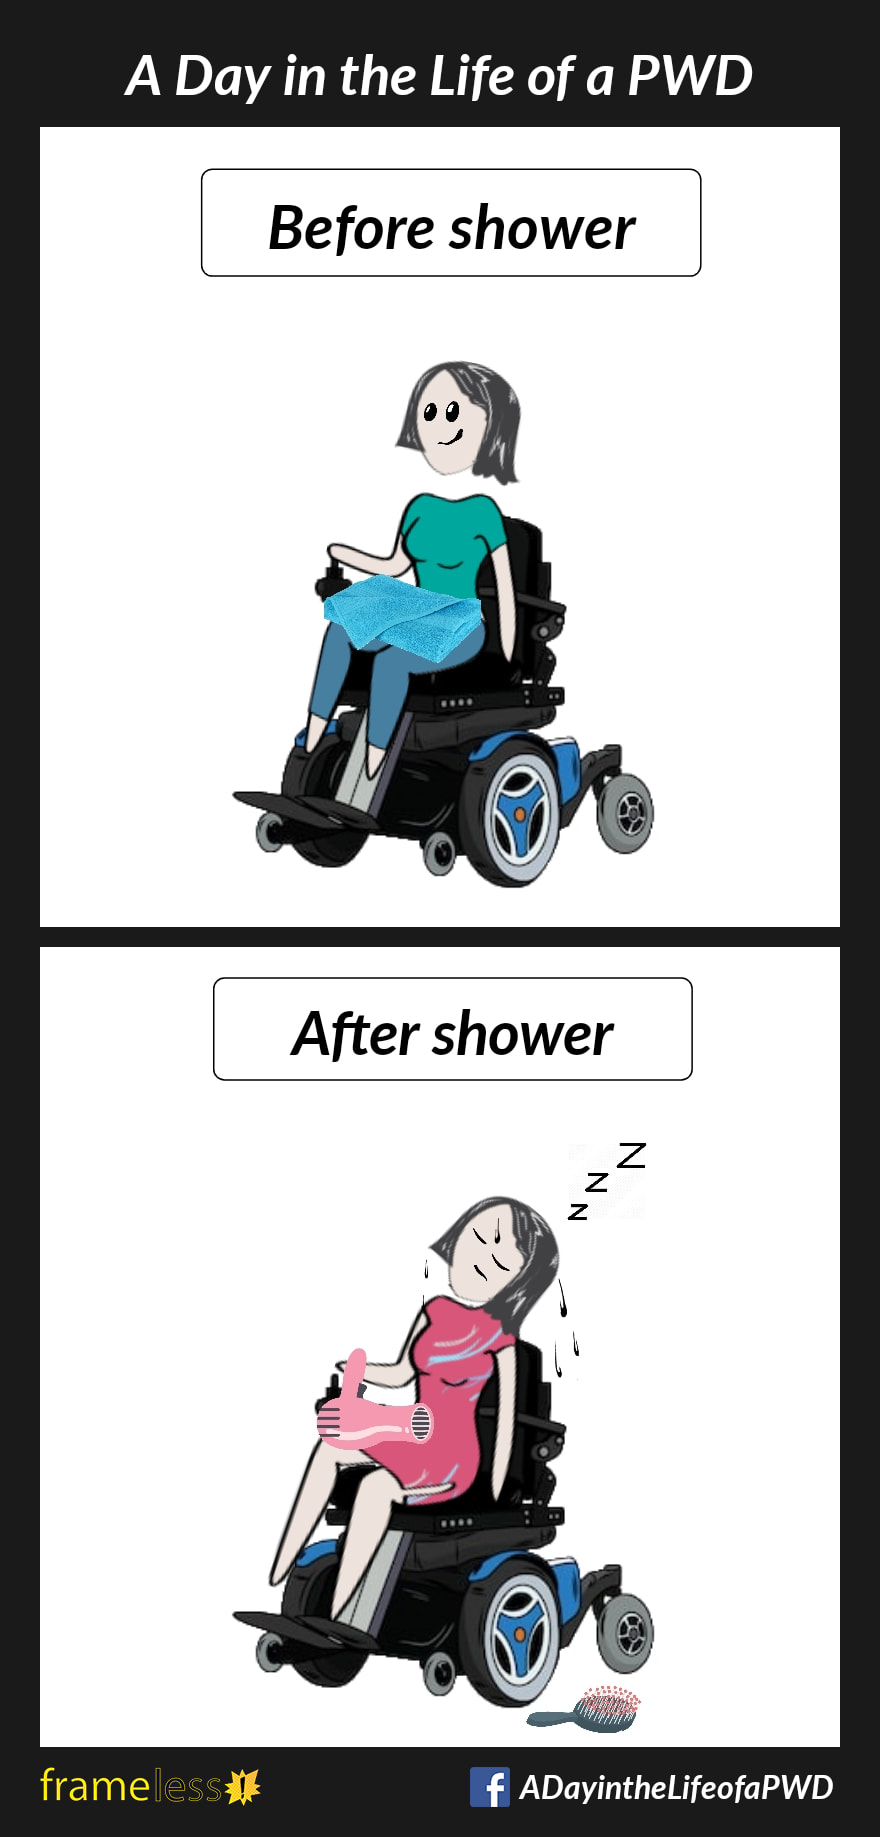 COMIC STRIP 
A Day in the Life of a PWD (Person With a Disability) 

Frame 1:
CAPTION: Before shower
A smiling woman in a power wheelchair carries a towel in her lap.

Frame 2:
CAPTION: After shower
The woman is fast asleep in her chair with a hair dryer on her lap. Her hair is still wet and her brush has fallen to the floor.